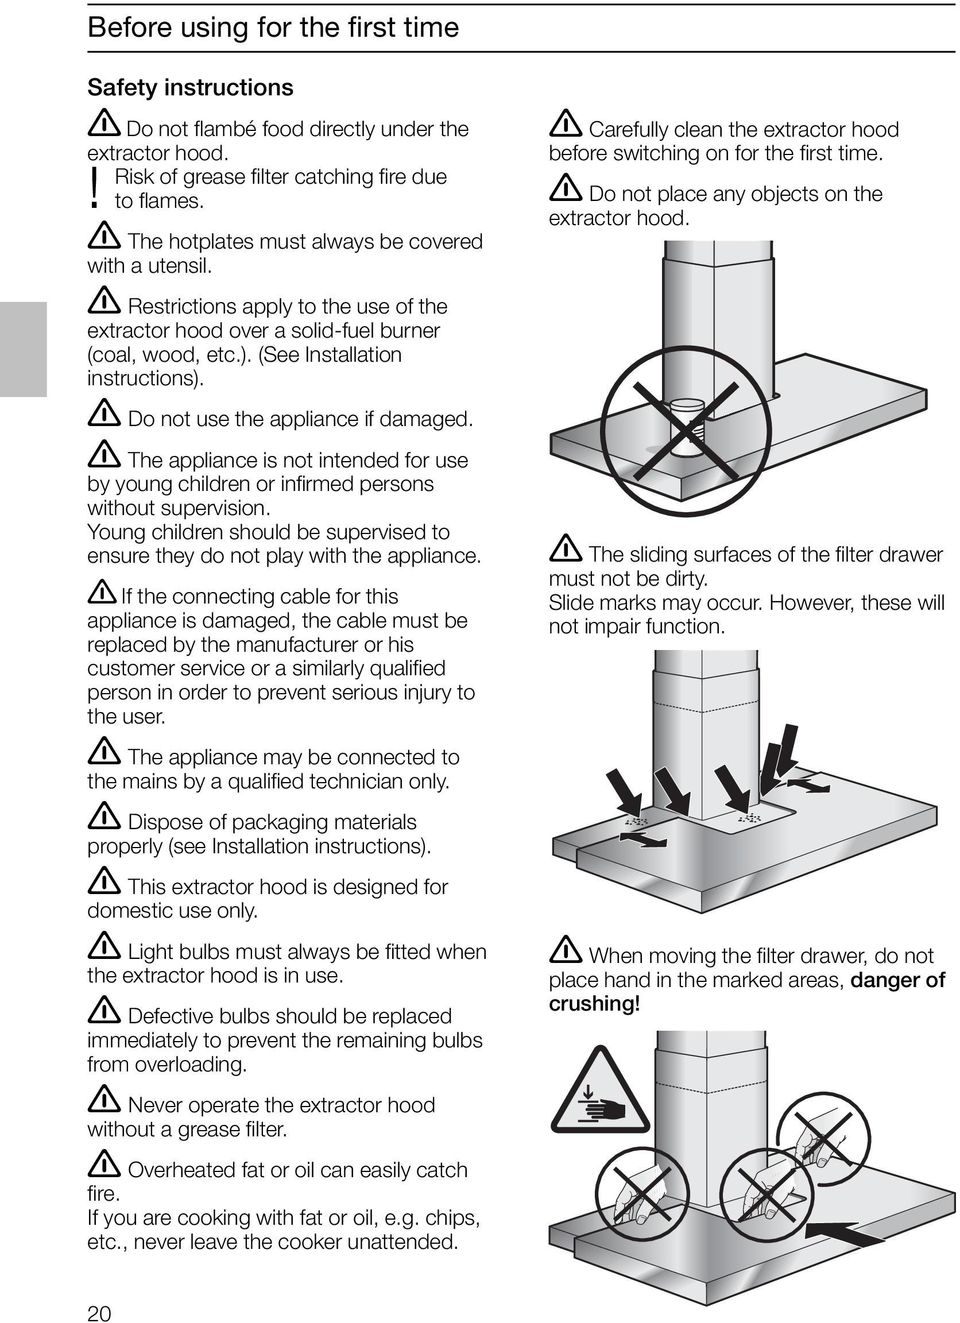 Do not use the appliance if damaged. The appliance is not intended for use by young children or infirmed persons without supervision.